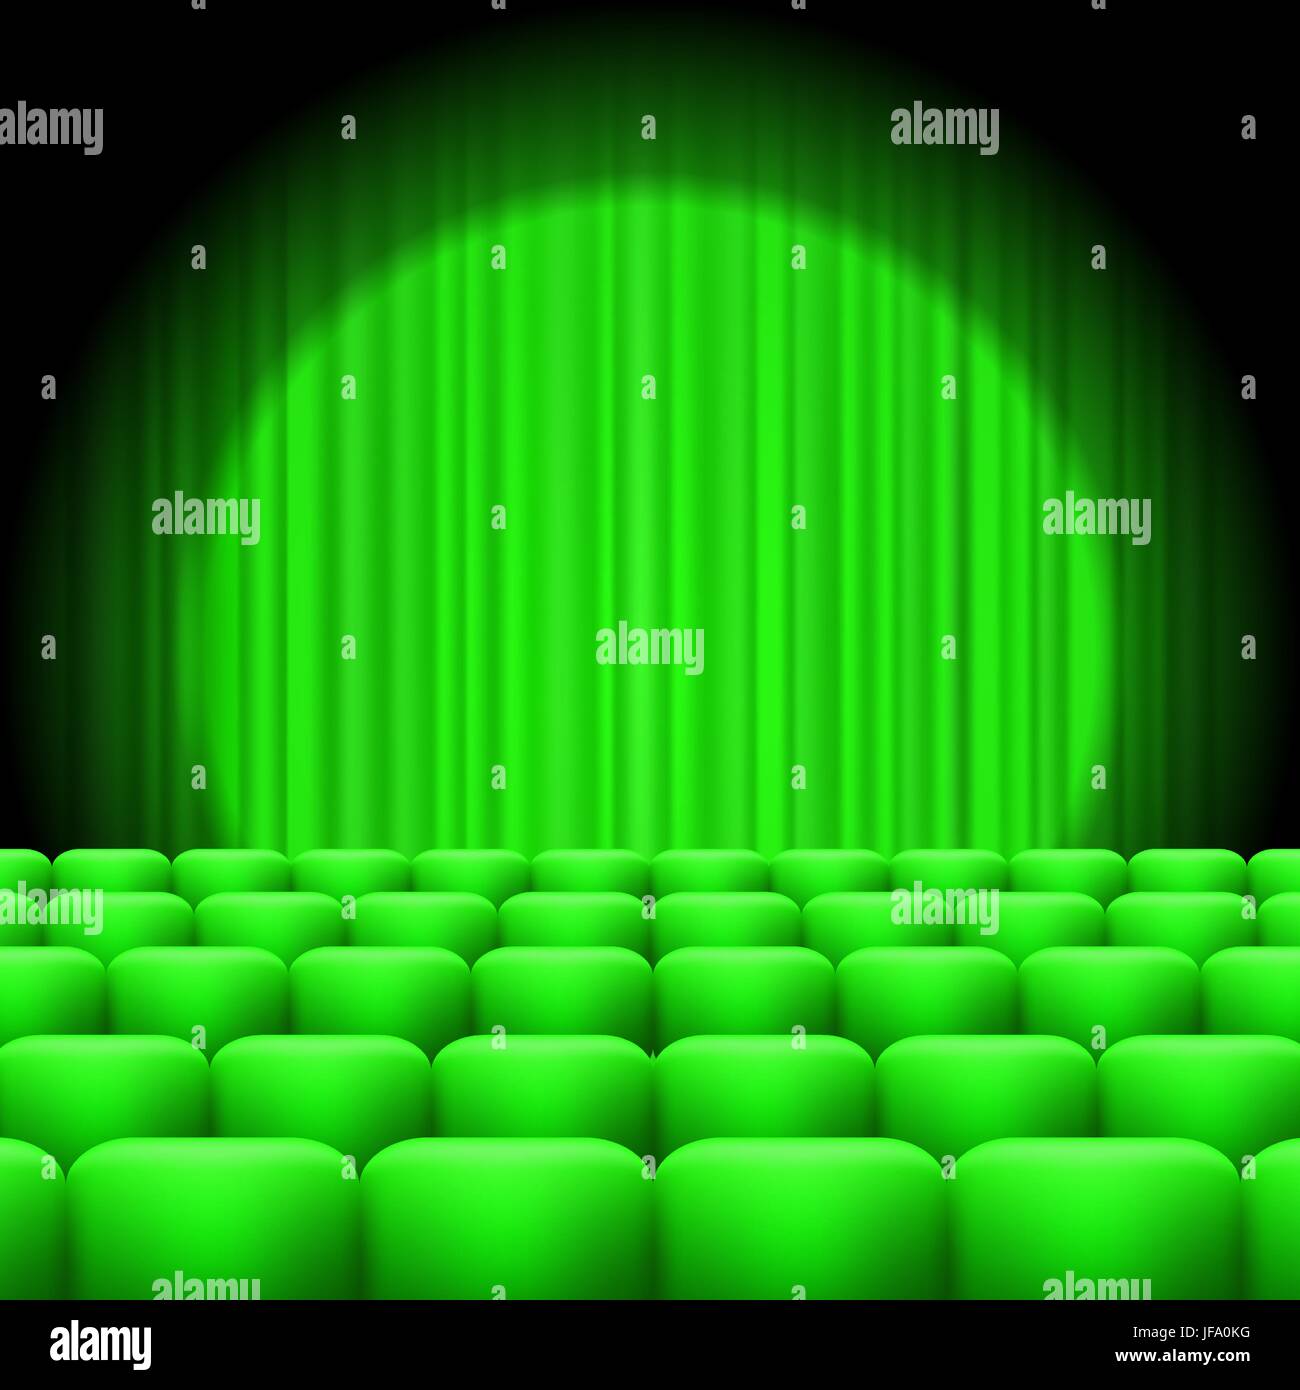 Green Curtains with Spotlight and Seats. Classic Cinema with Green Chairs Stock Vector